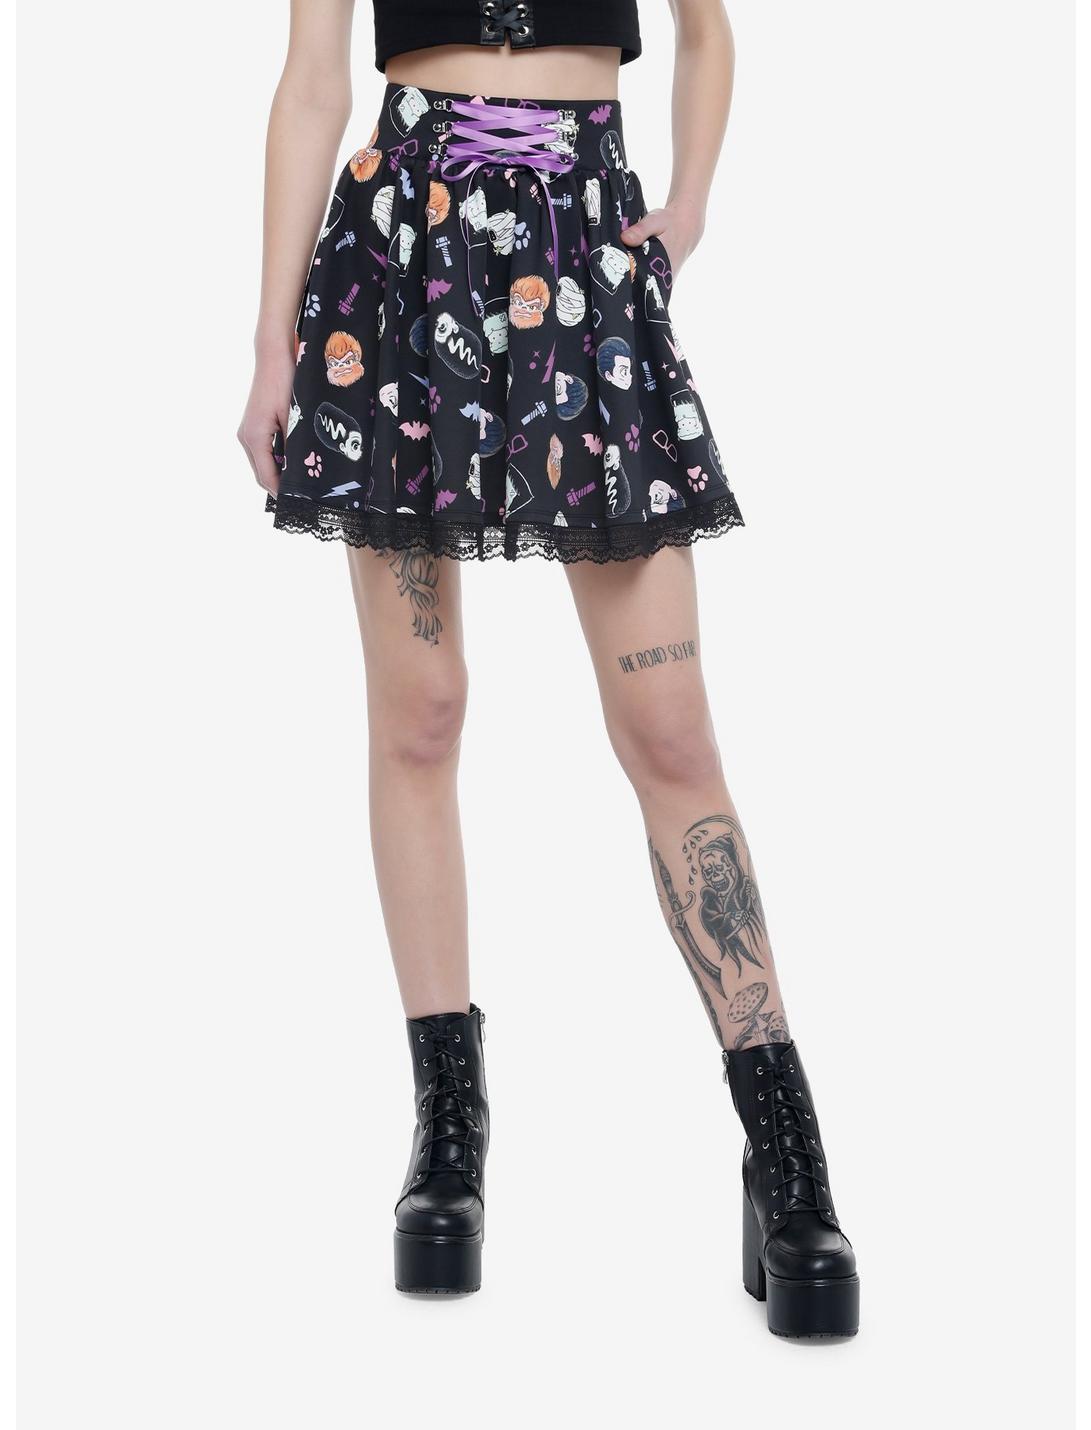 Universal Monsters Chibi Lace-Up Skirt, MULTI, hi-res